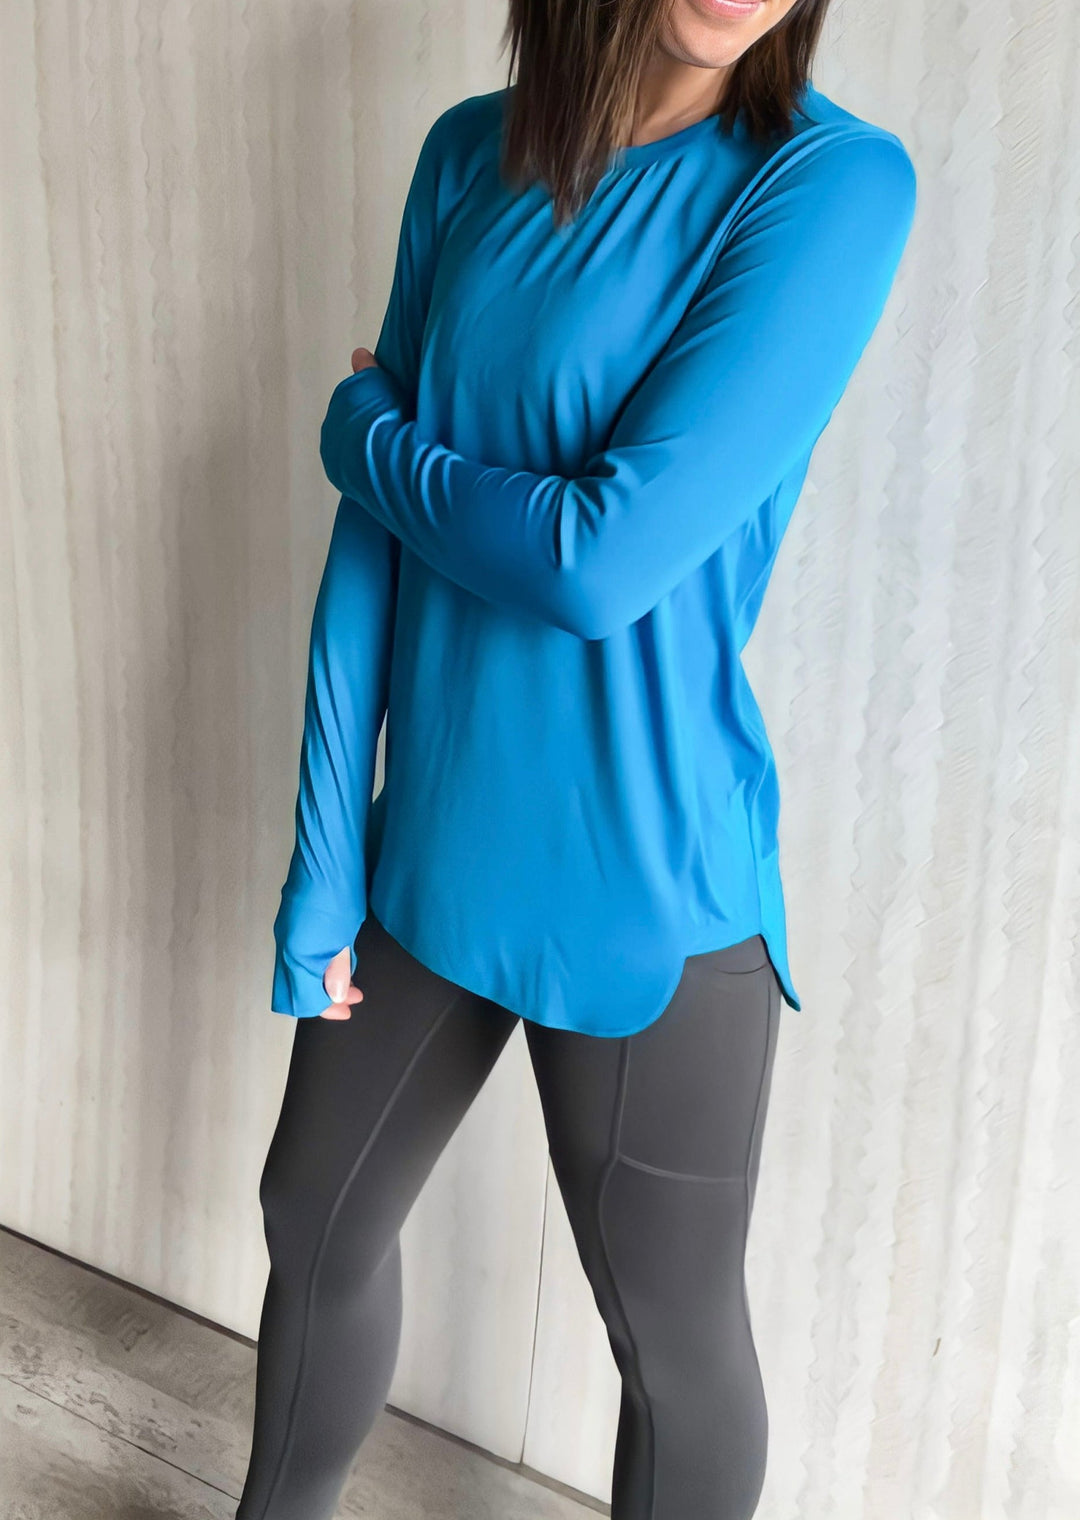 Sky Blue Active Top with Thumb Holes